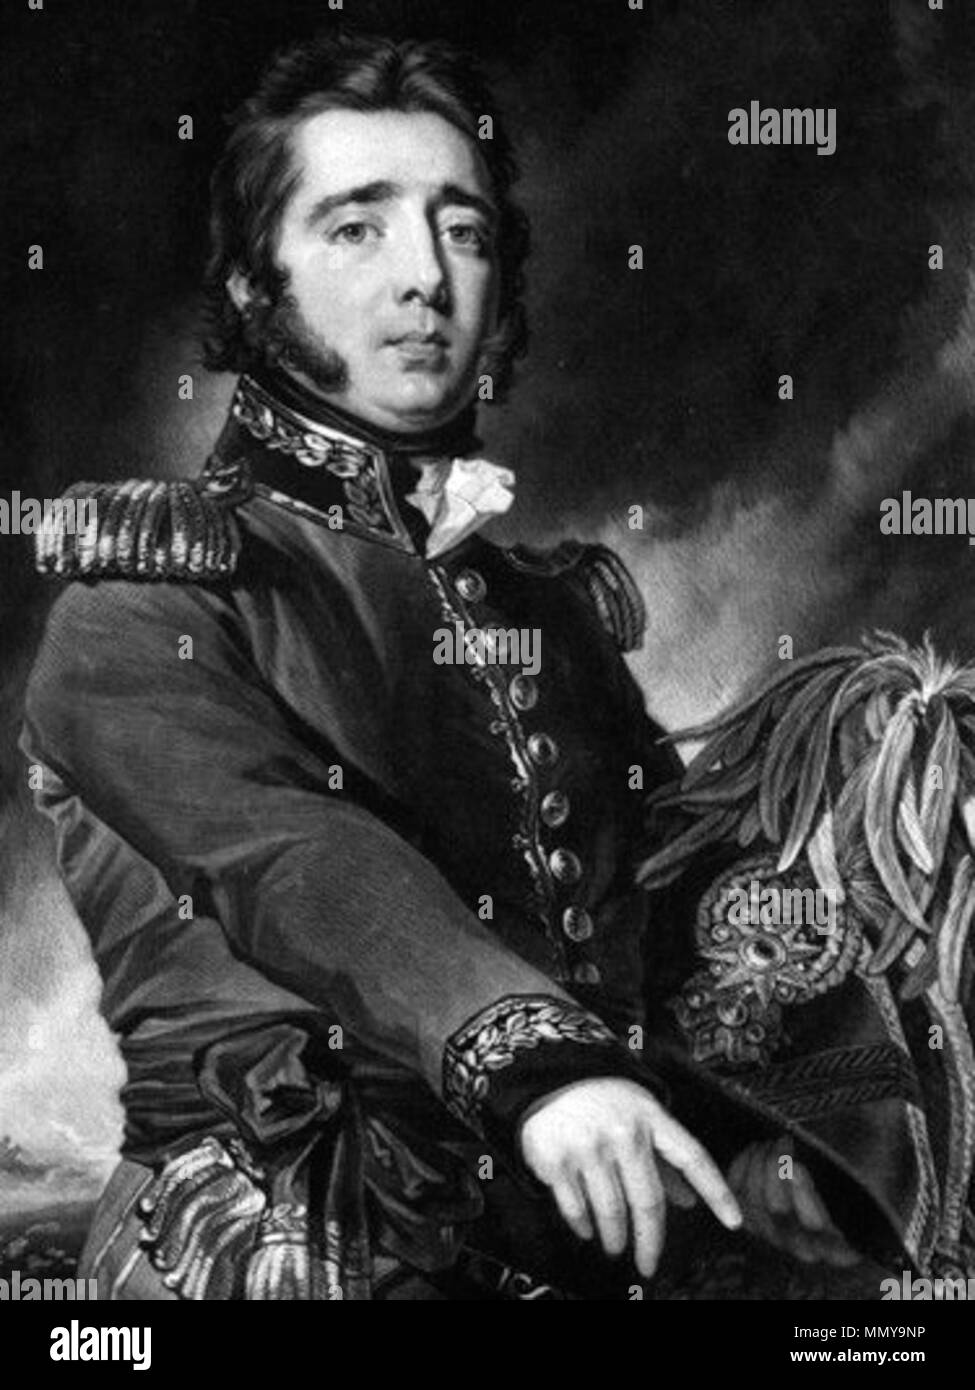 . English: General Gregor MacGregor (1786–1845), who, after fighting in the South American wars of independence, returned to Britain and falsely claimed to have been made 'cacique' of a fictional Central American country, 'Poyais', all in an effort to defraud land investors. Nearly 200 died in 1822 and 1823 in connection with MacGregor's deception, having immigrated to his invented country.  . between 1820 and 1835. Samuel William Reynolds (1773–1835), after Simon Jacques Rochard (1788–1872) Gregor MacGregor Stock Photo